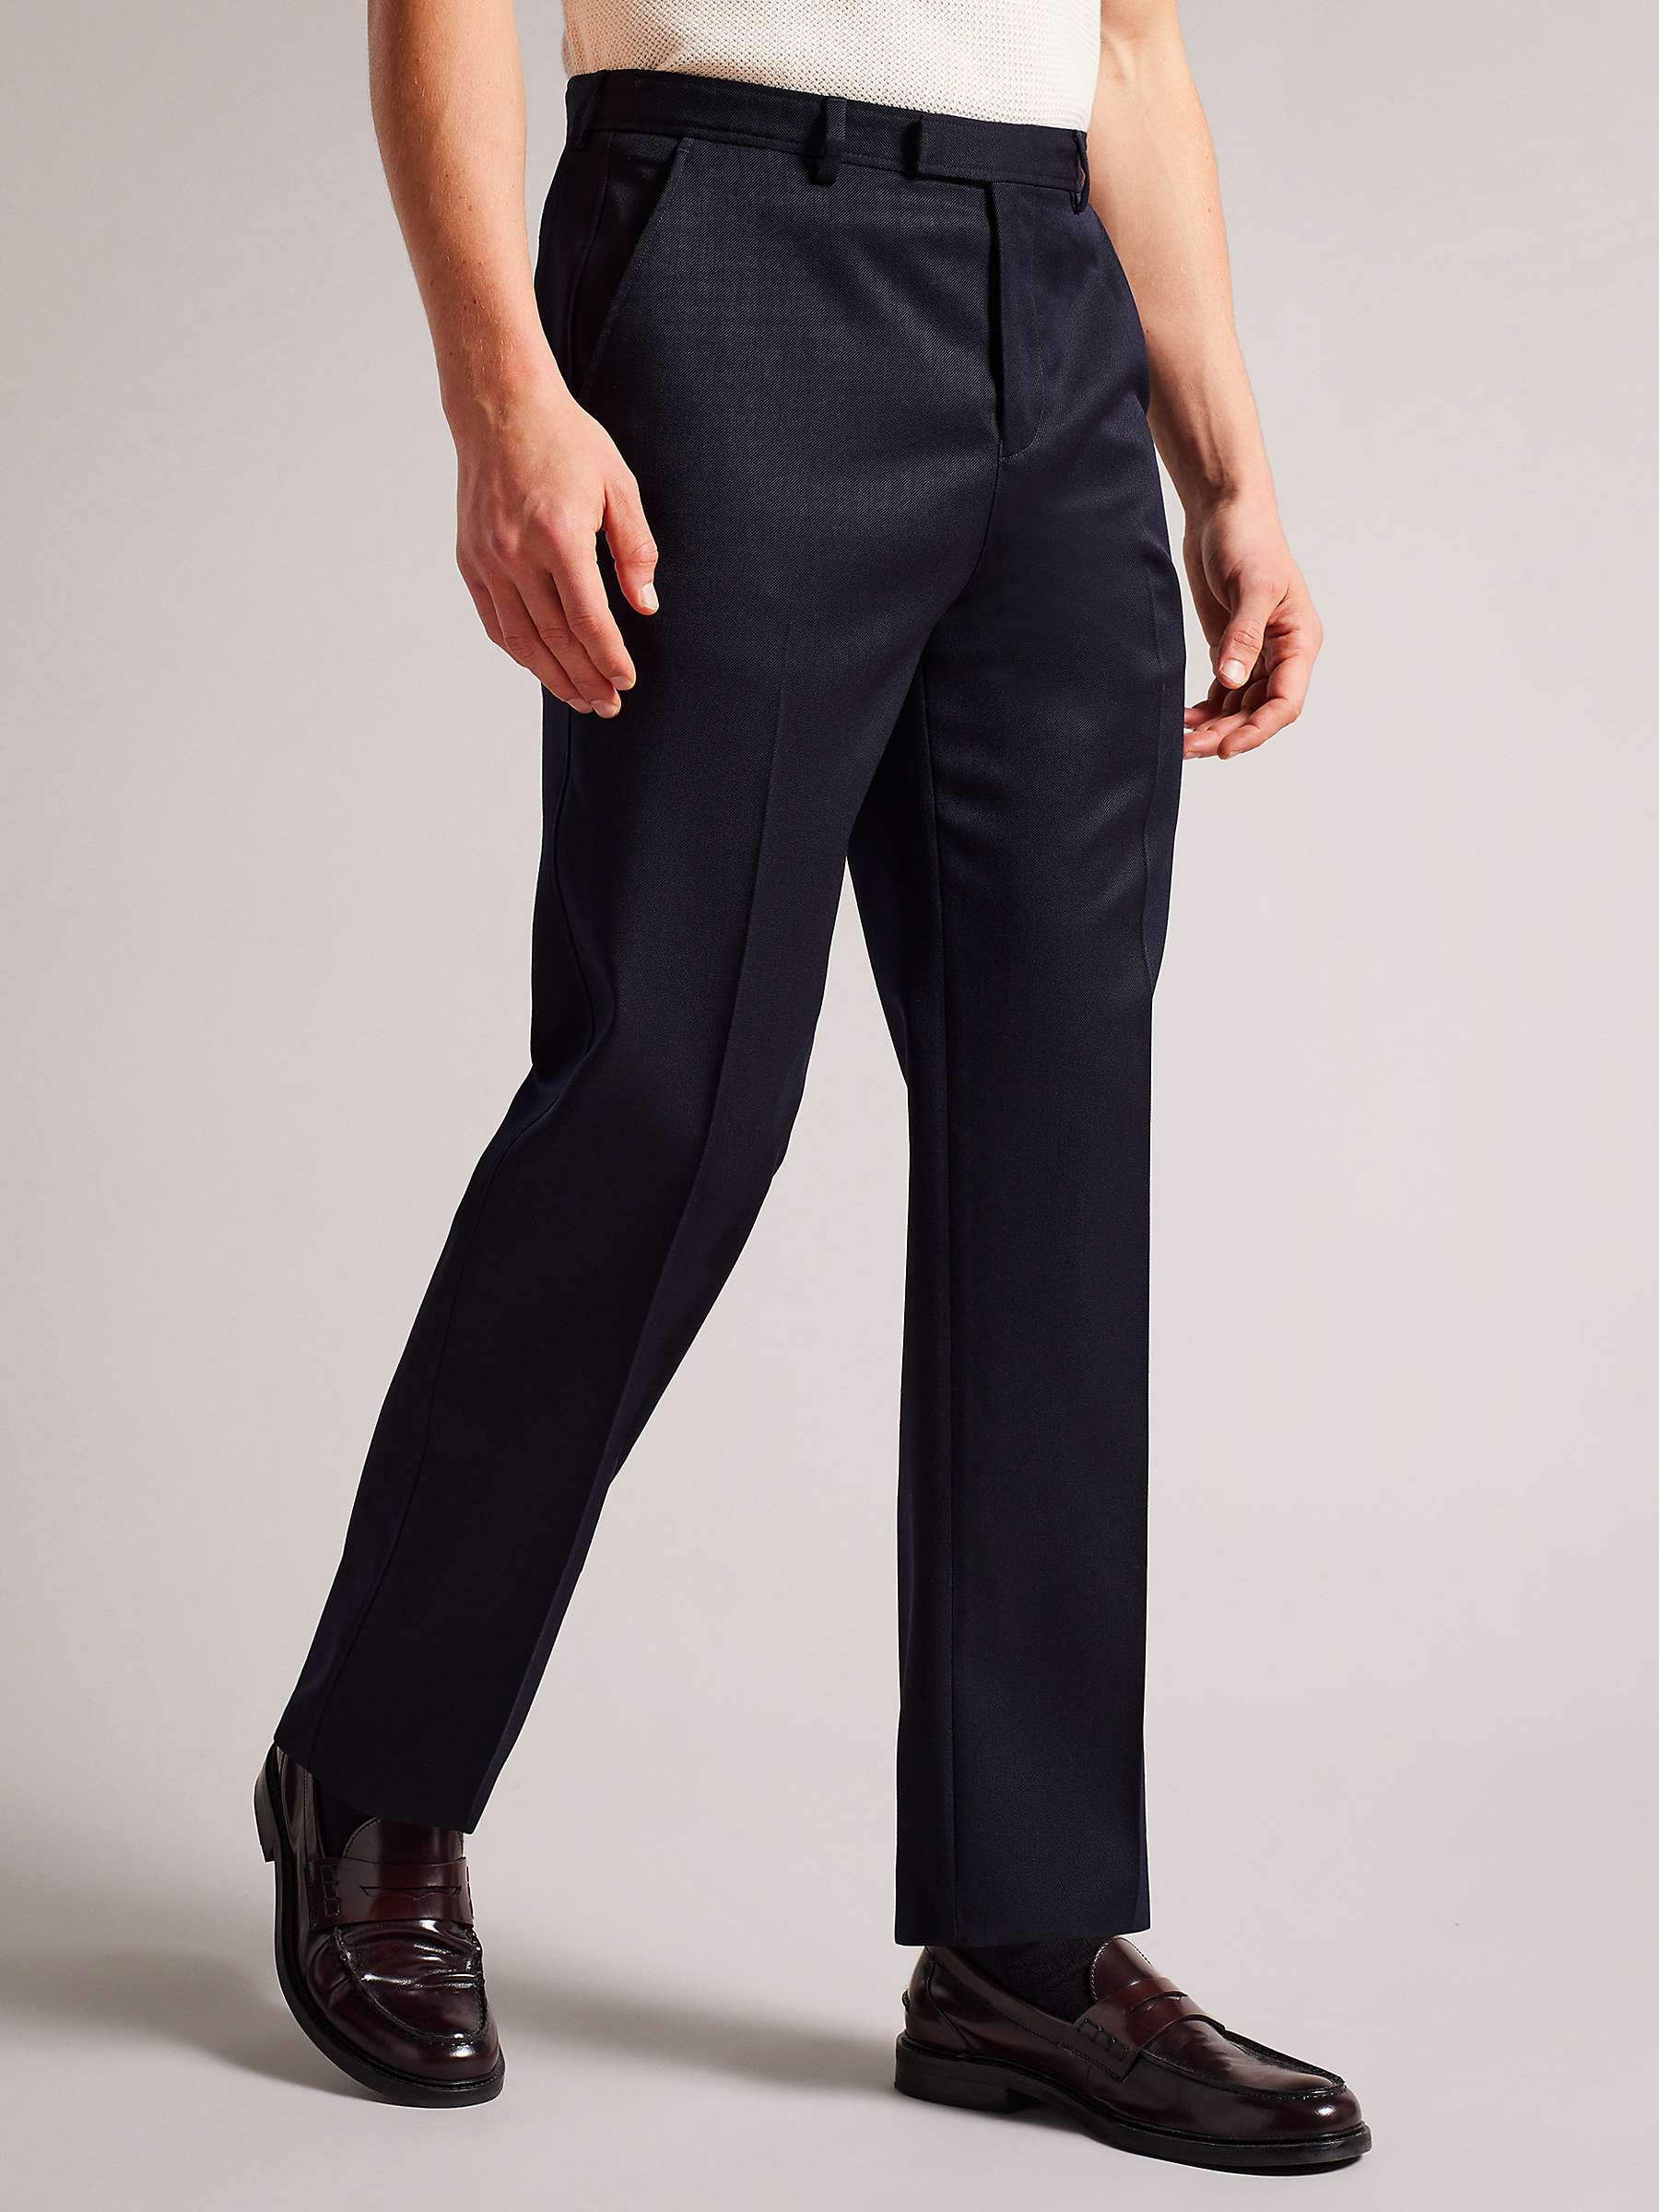 Ted Baker Heddon Tailored Trousers, Navy at John Lewis & Partners